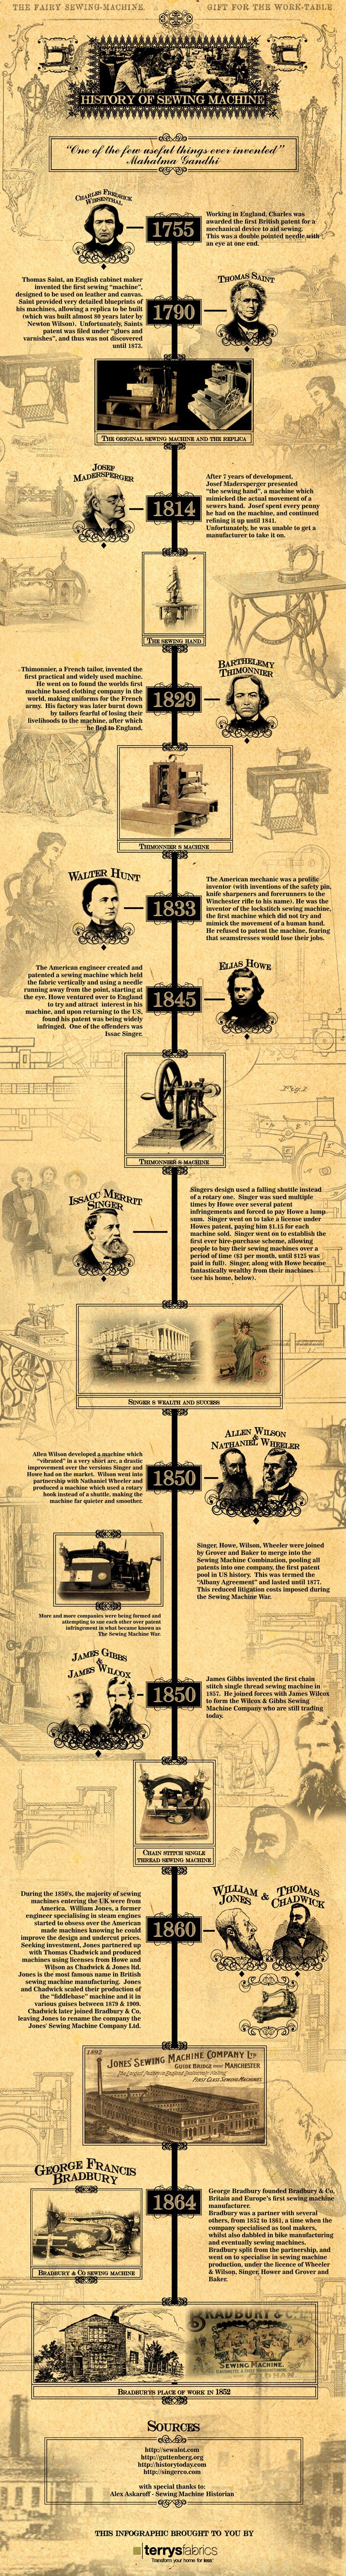 History Of The Sewing Machine